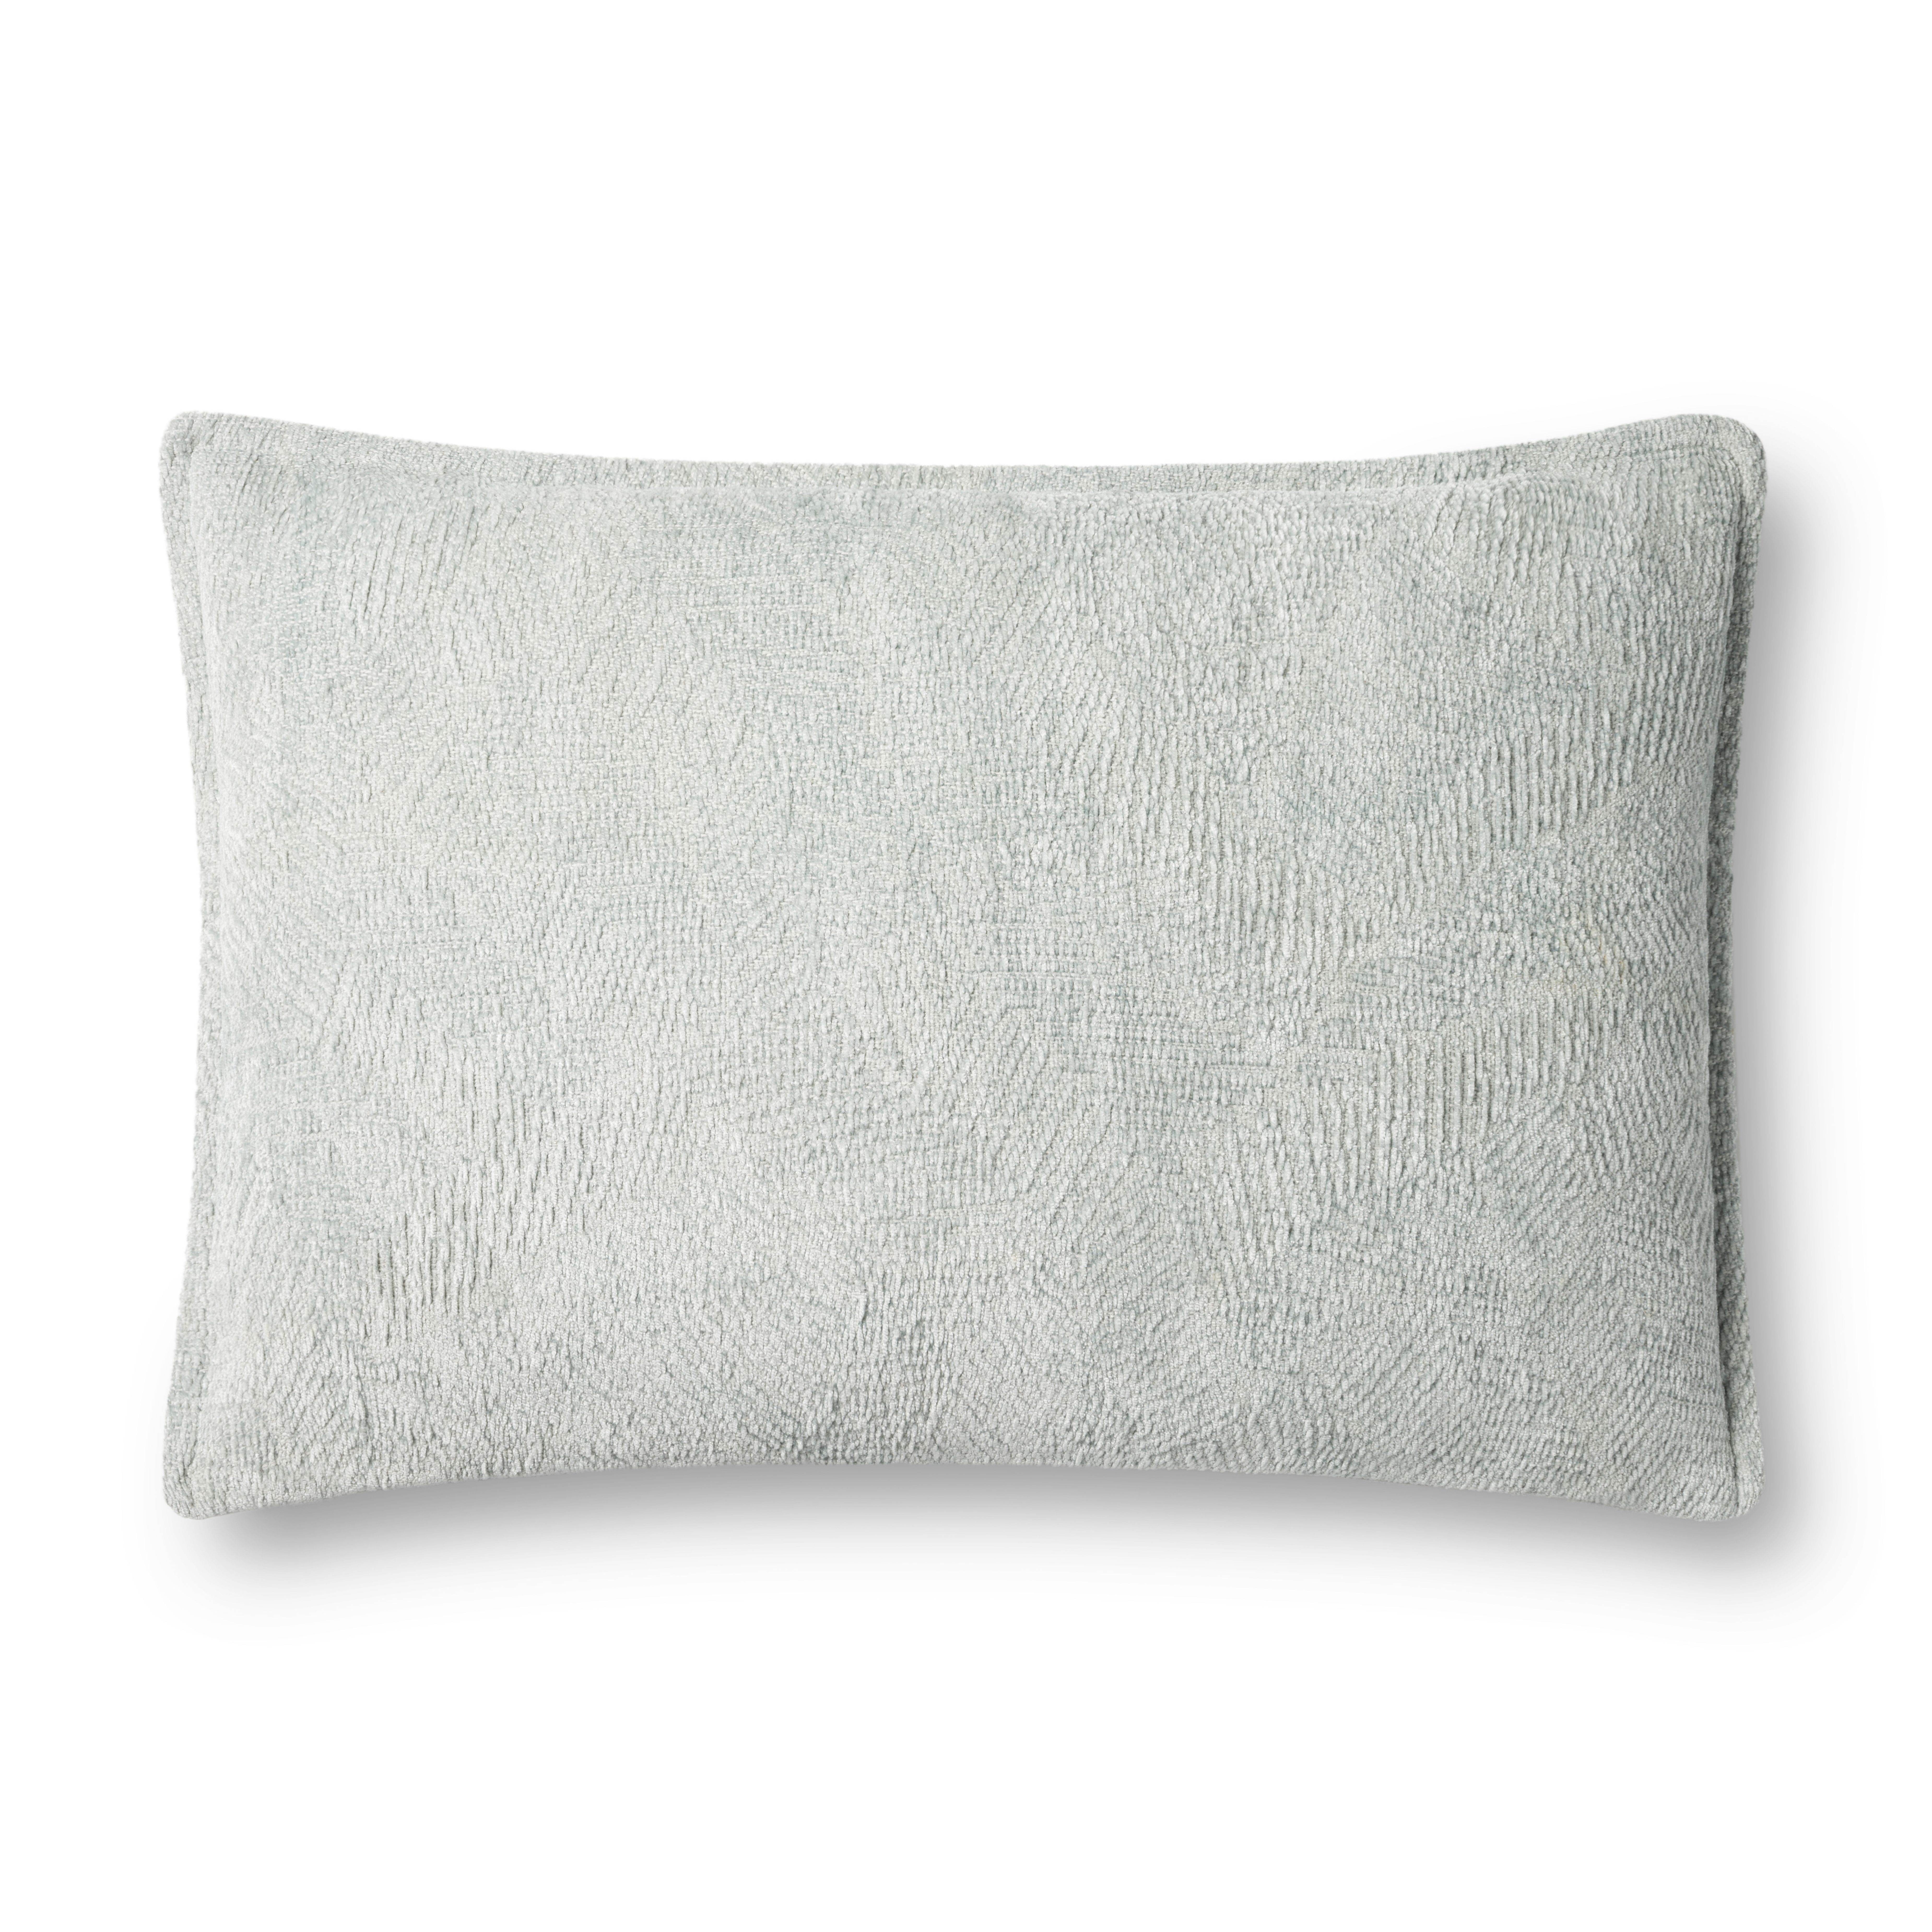 Loloi PILLOWS P0831 Silver Sage 16" x 26" Cover Only - Loloi Rugs